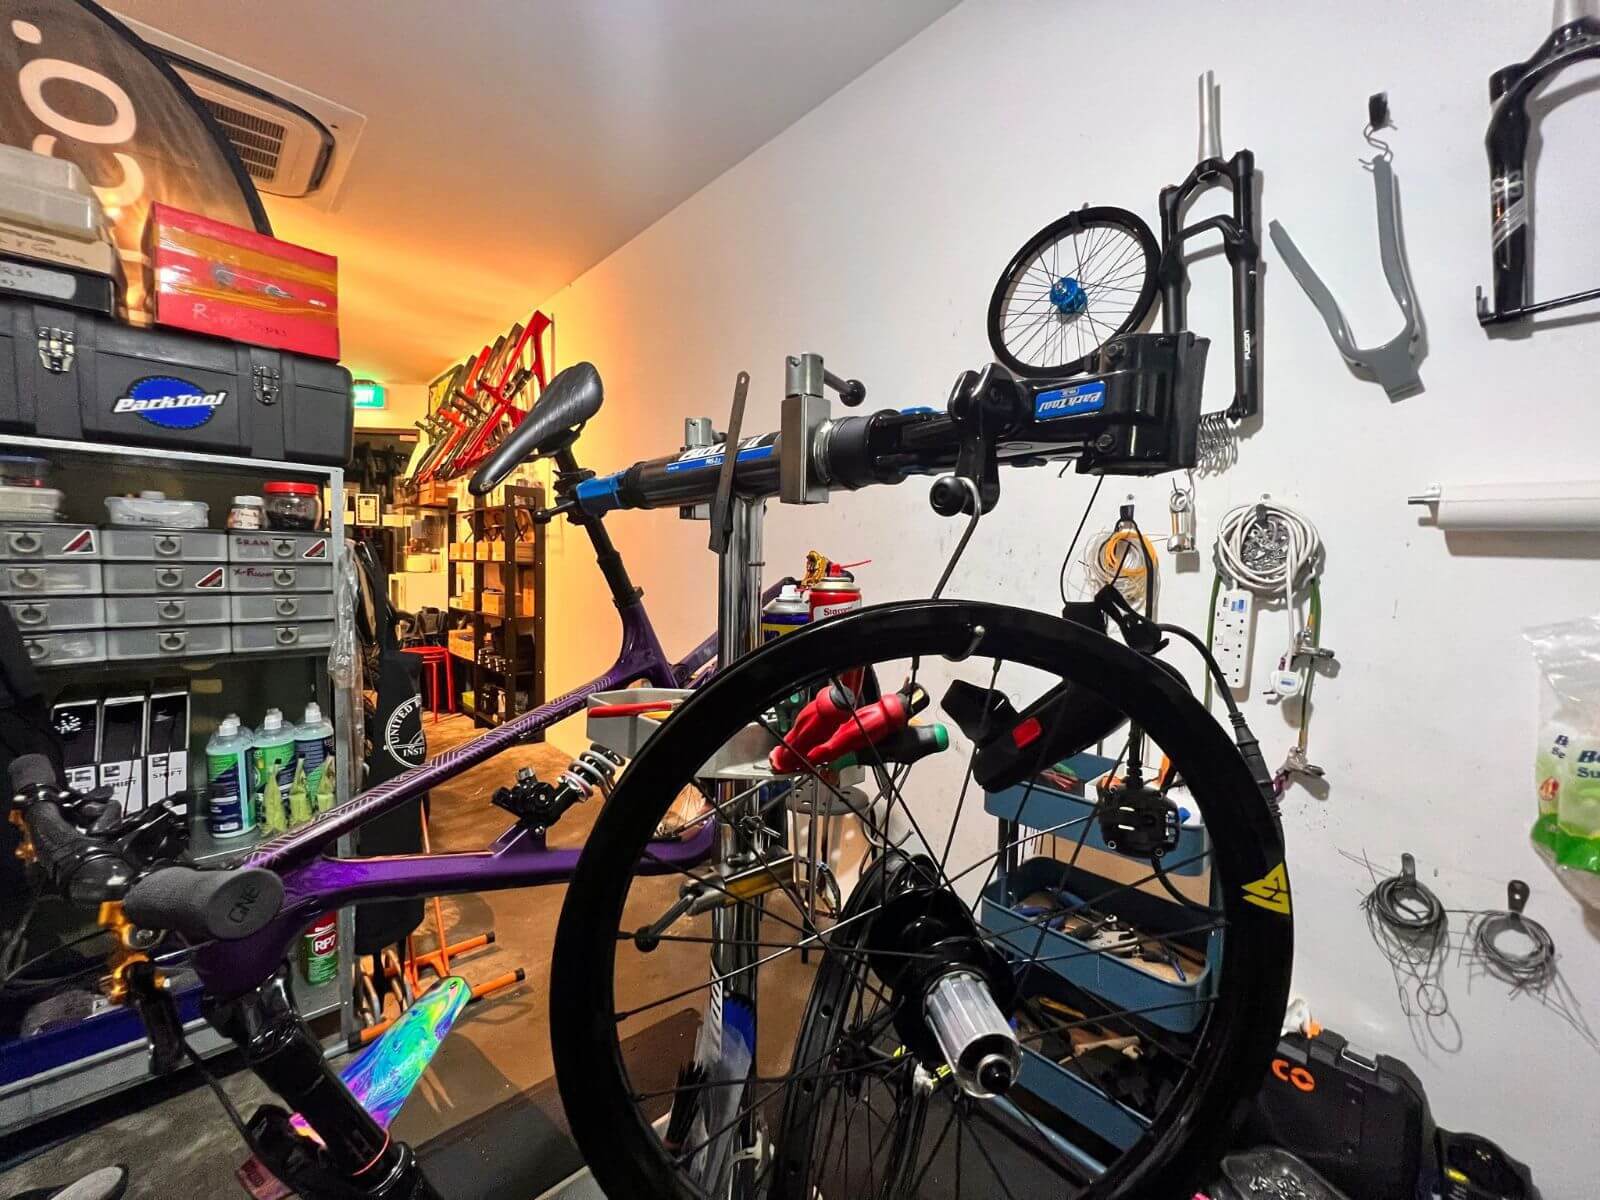 High-End Boutique Bicycle Shop For Sale: Profits Guaranteed!